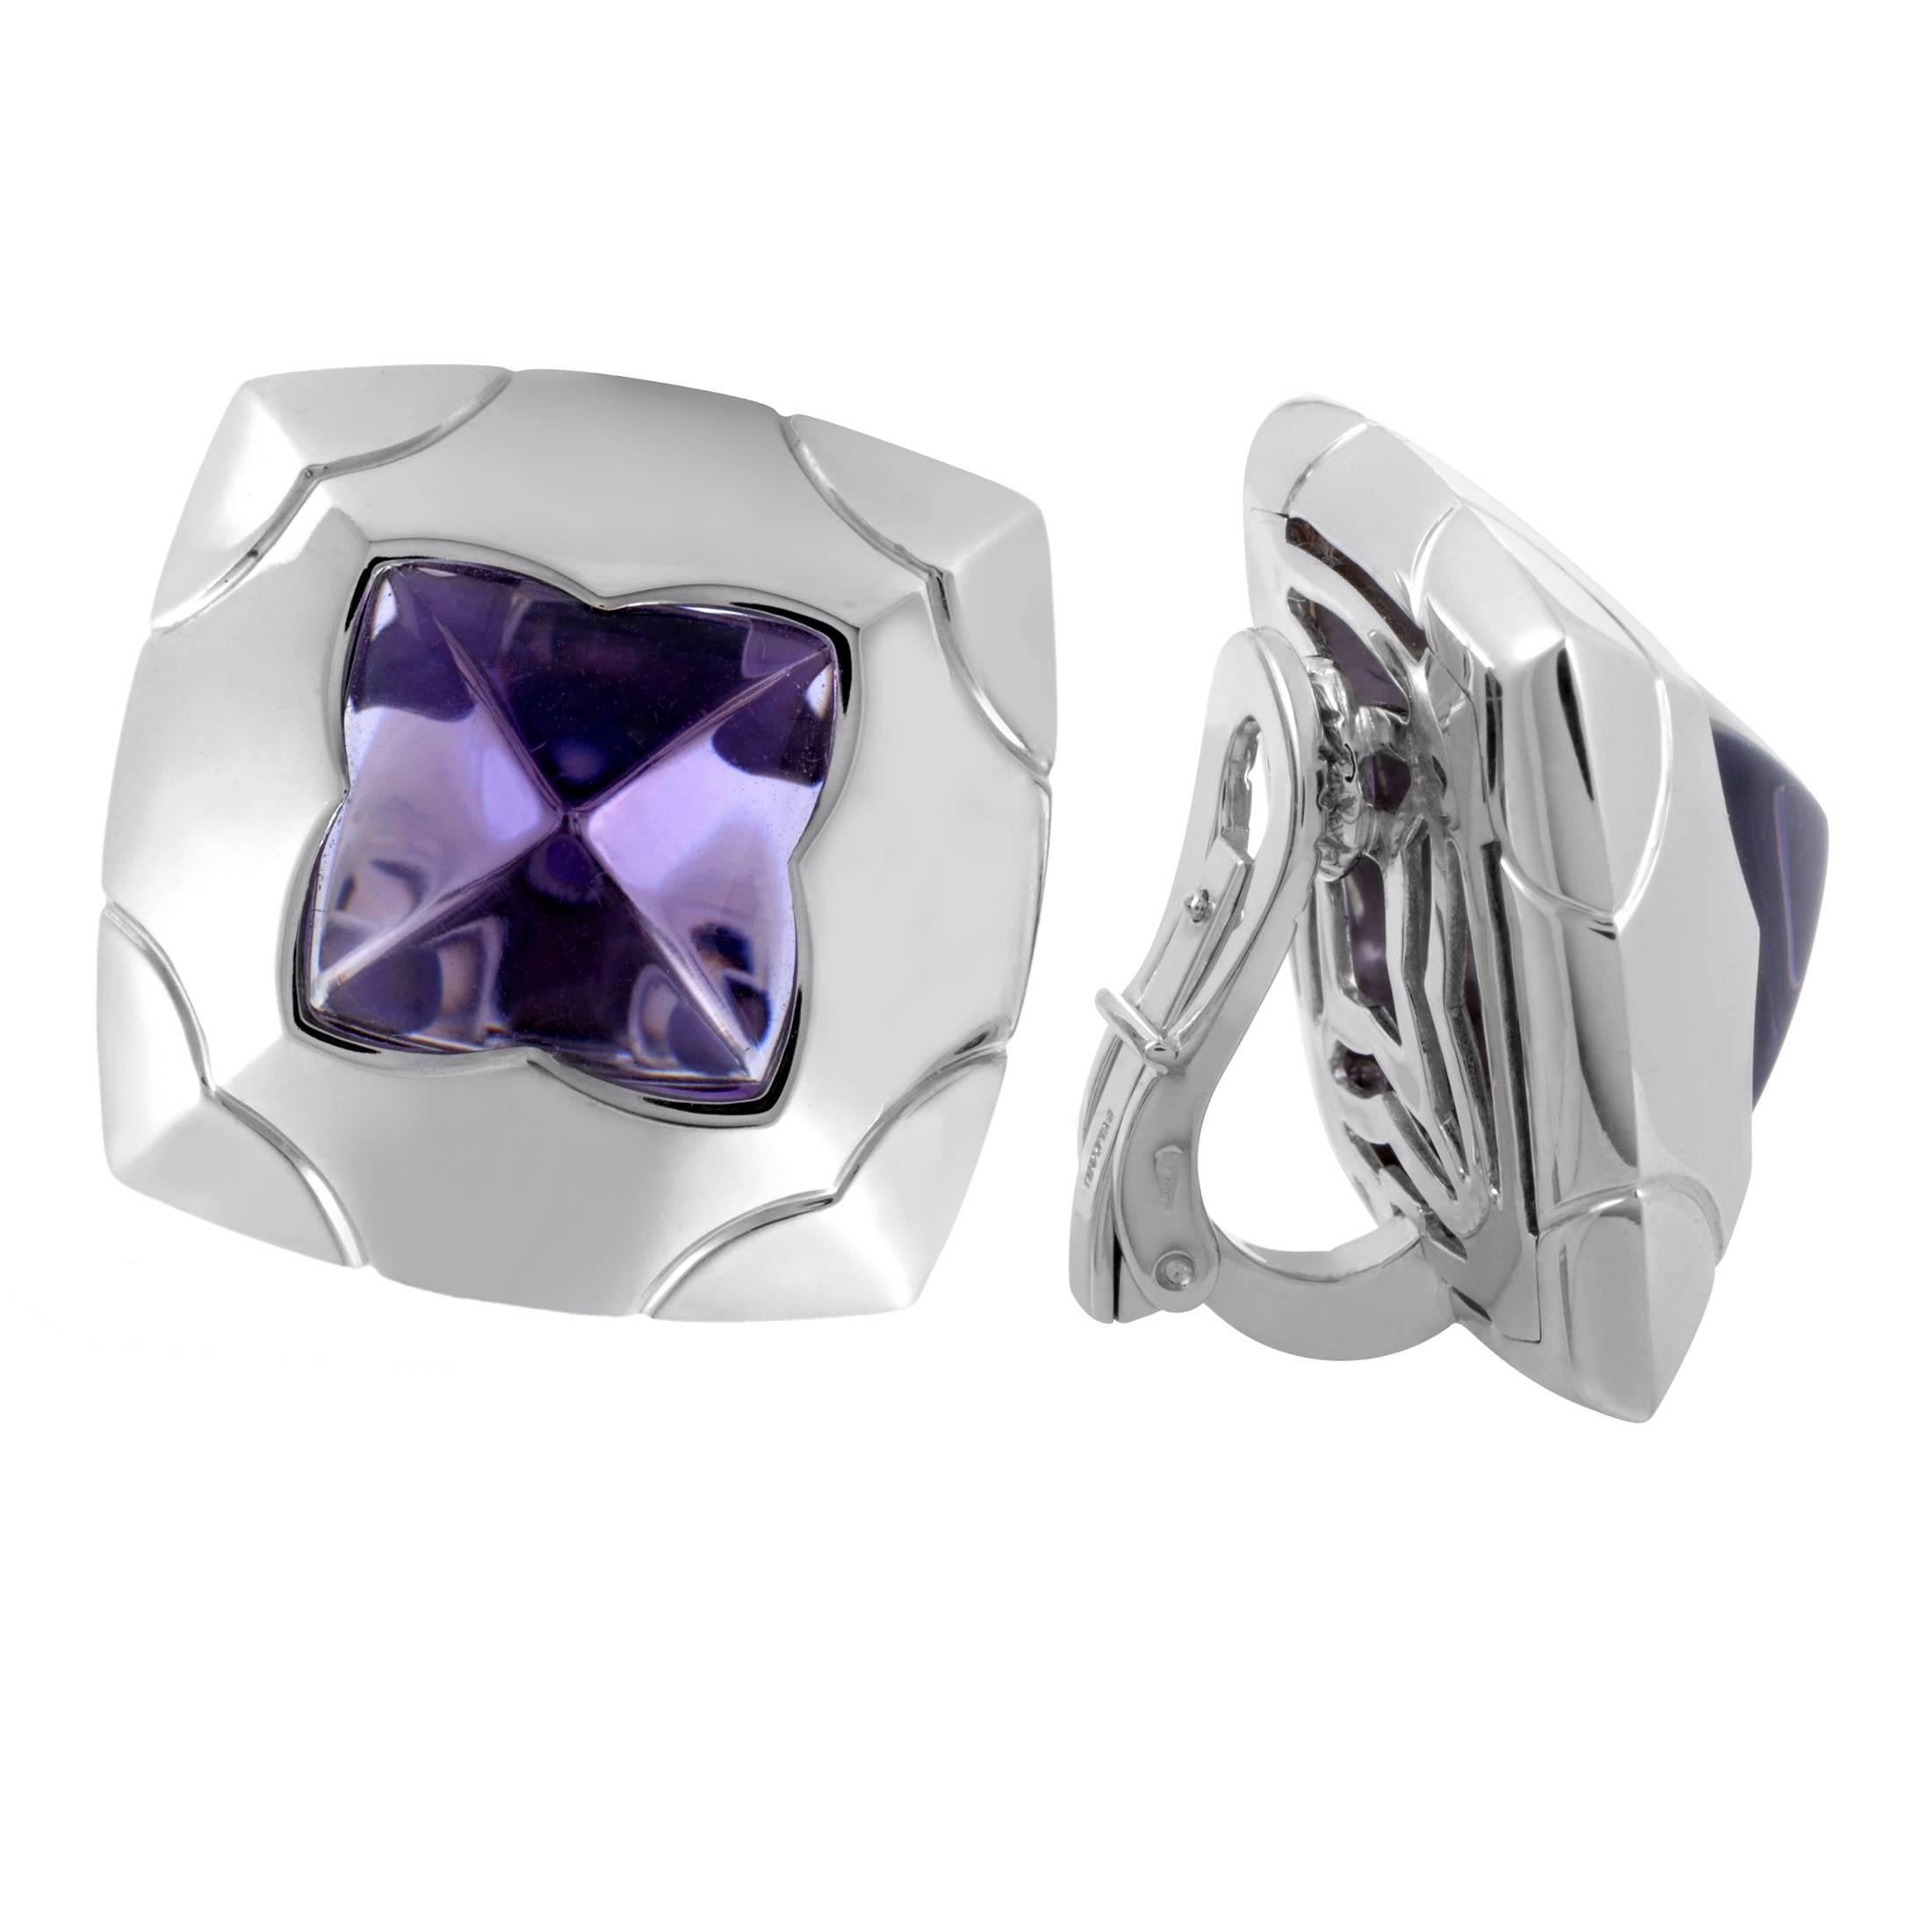 Boasting the brand's recognizable pyramidal shape and fascinatingly combining the gleaming 18K white gold with wonderfully glistening amethysts, these remarkable earrings from Bulgari are a delightful and appealing sight to behold.
Included Items: